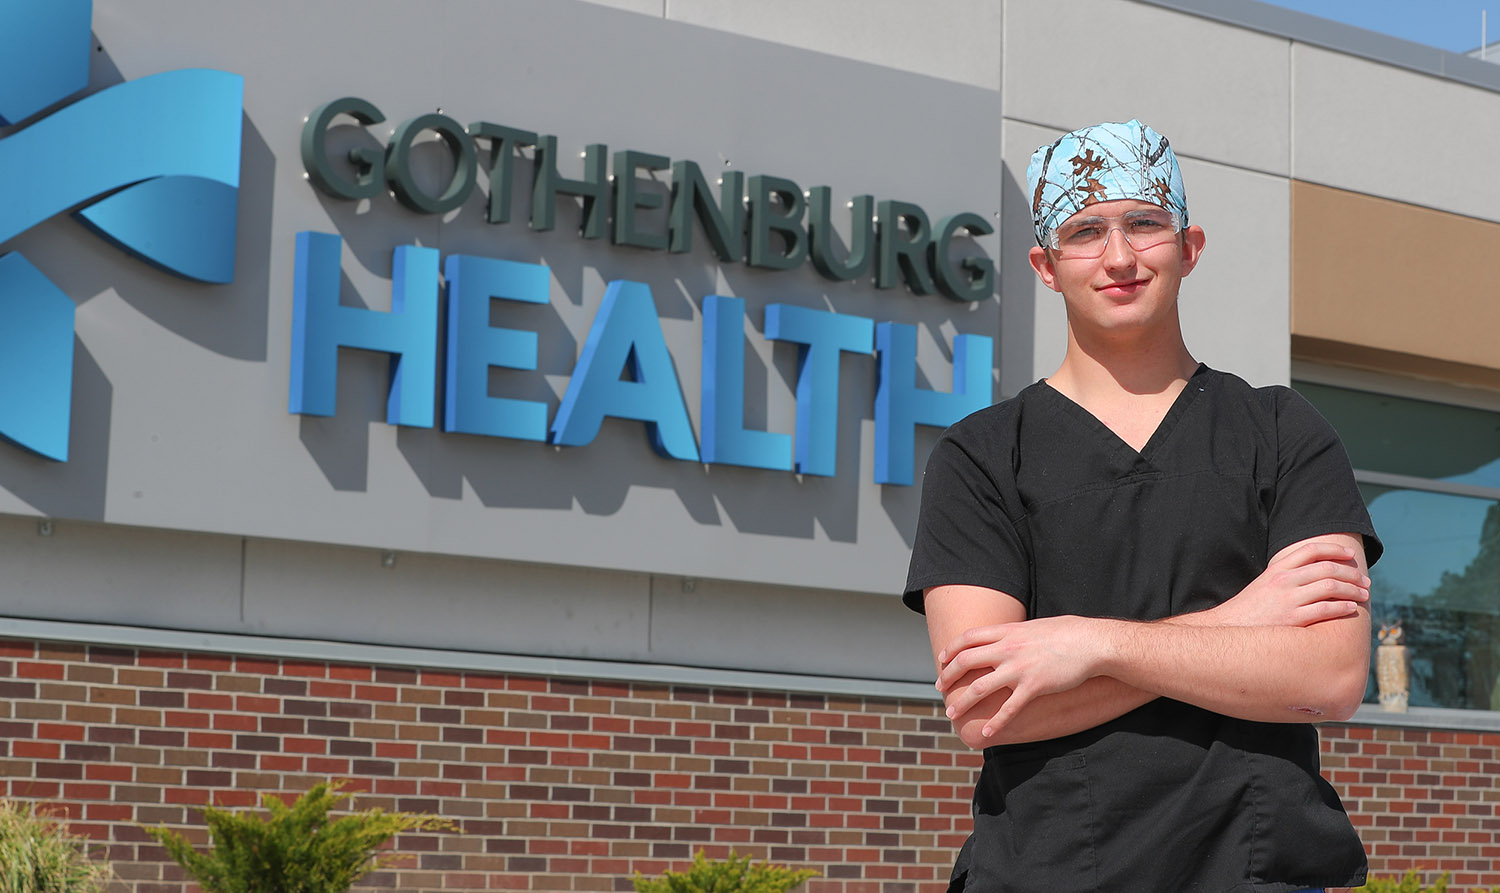 UNK freshman Preston Smith works as a certified nursing assistant at Gothenburg Health. The 19-year-old says the coronavirus outbreak doesn’t impact his decision to pursue a health care career. “It’s what we sign up for – to help people. We’re there to help people during those hard times.”